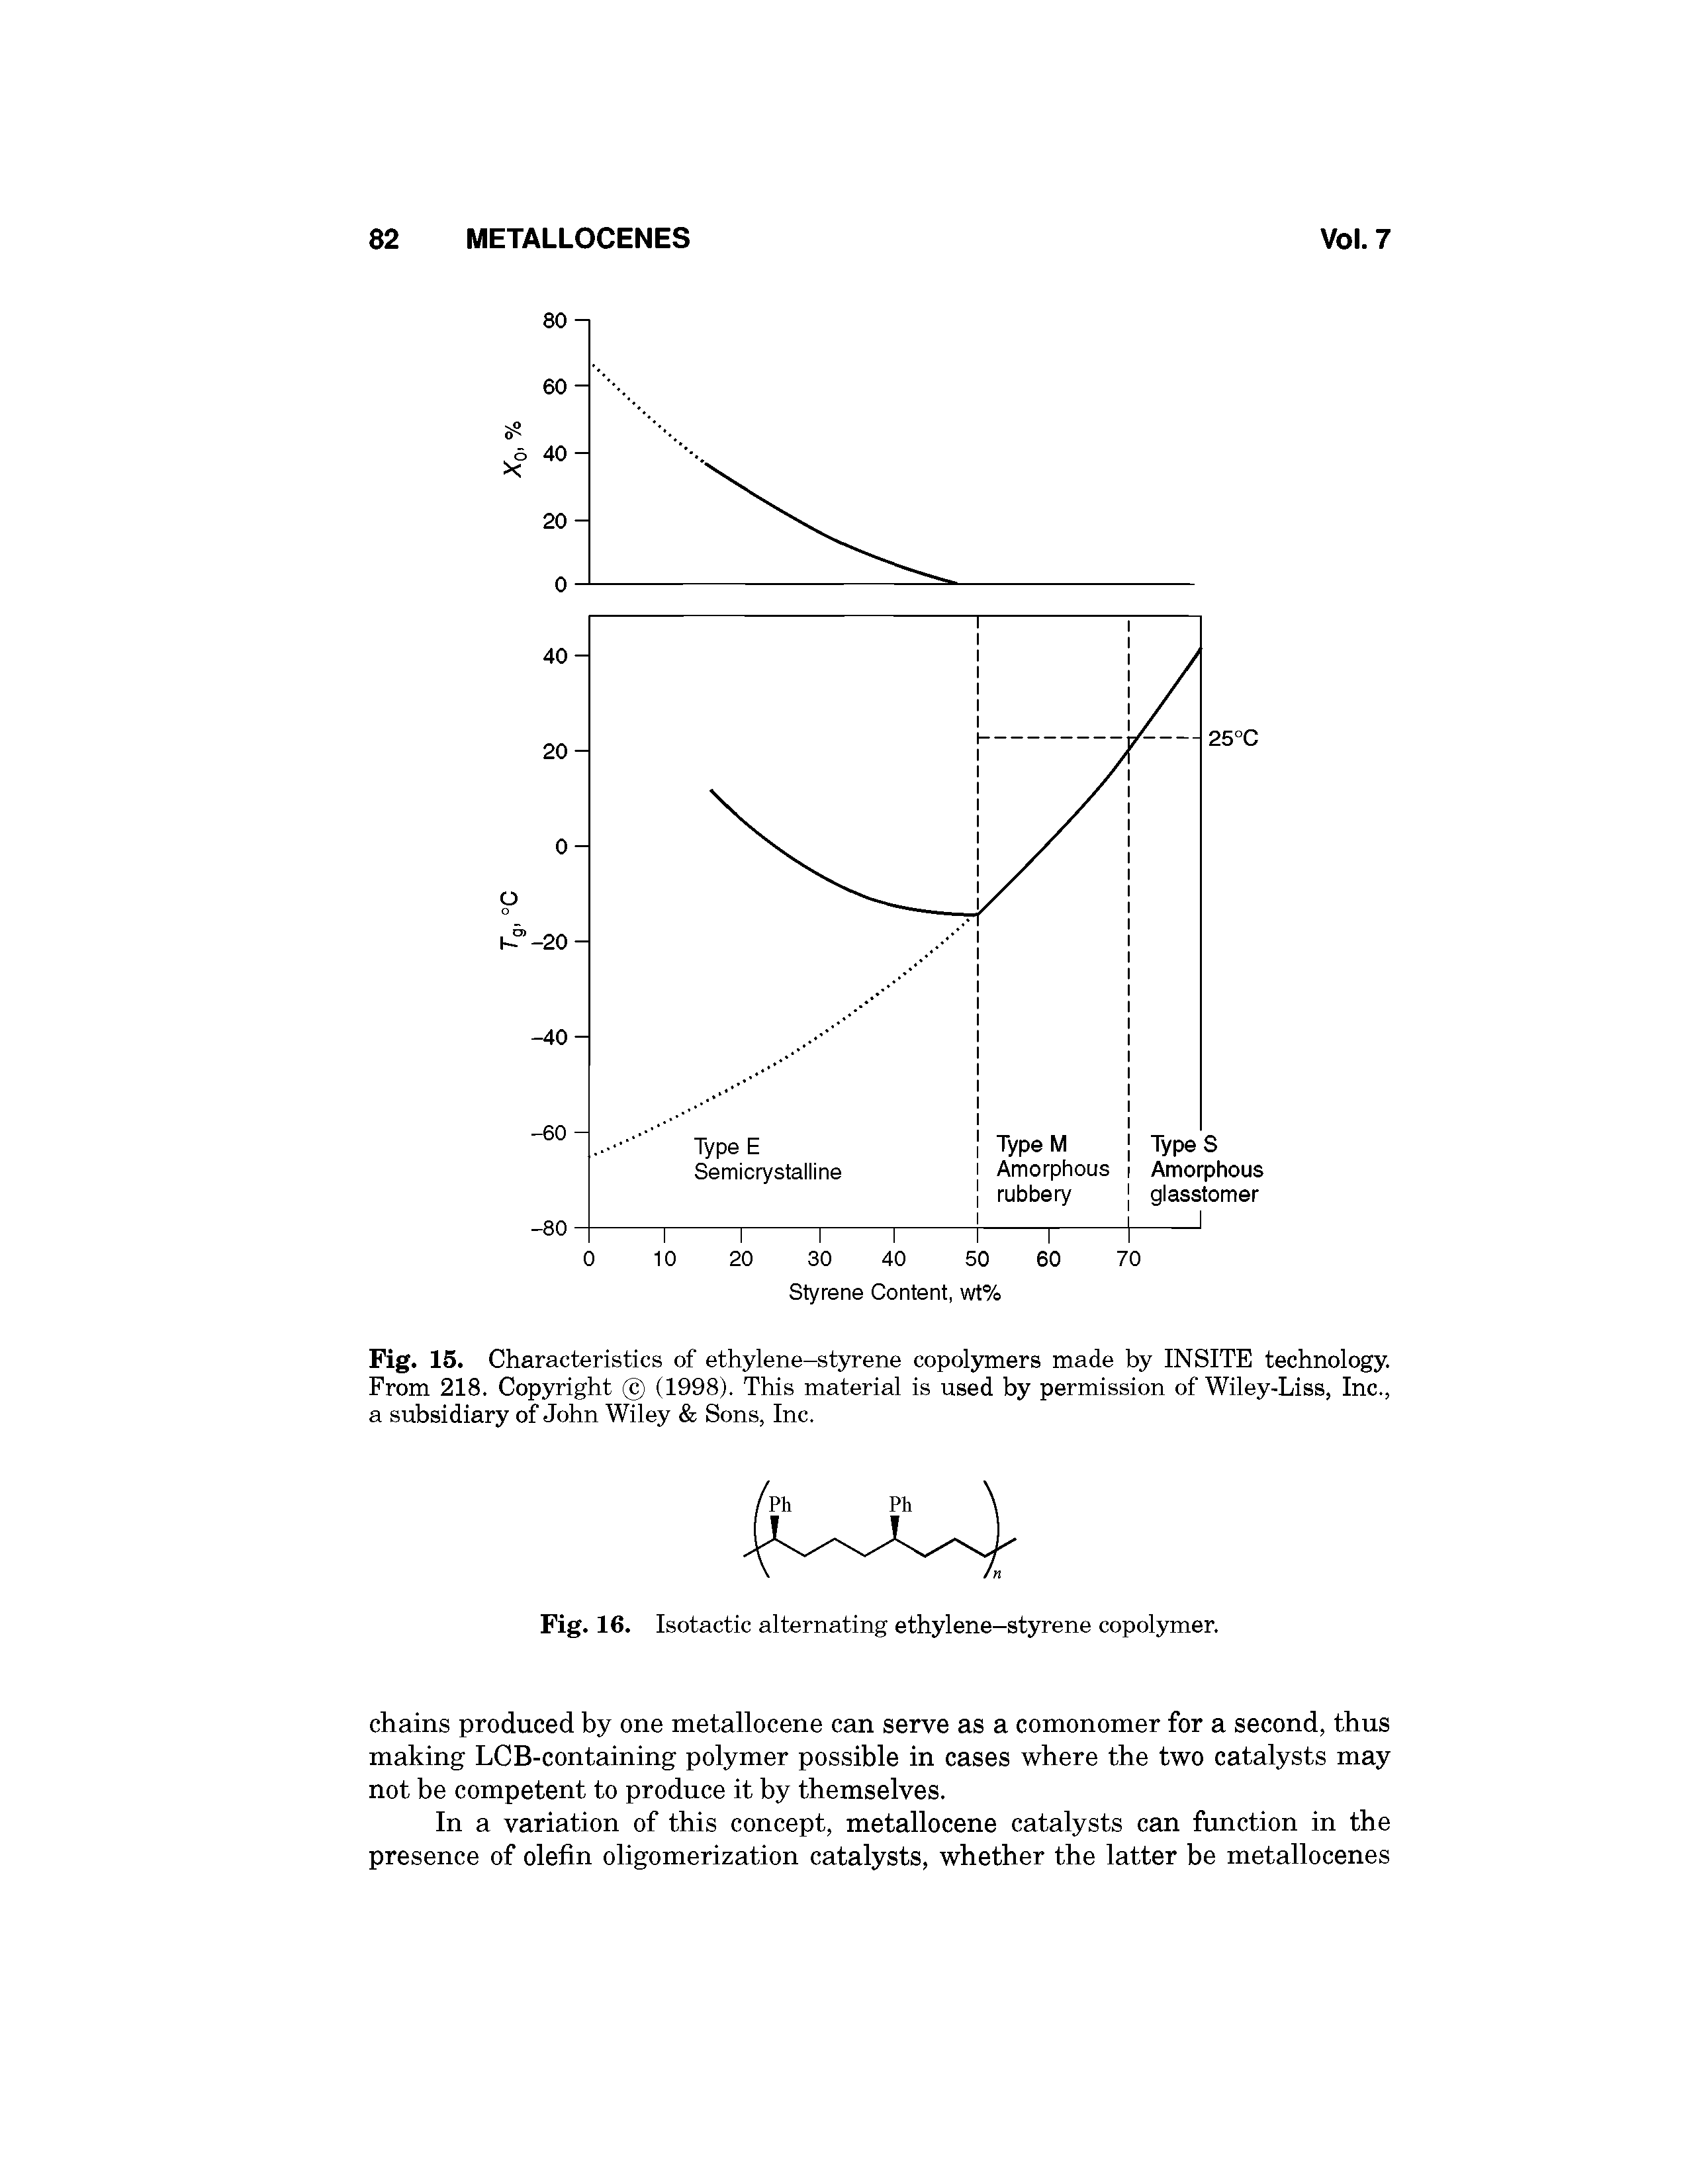 Fig. 15. Characteristics of ethylene-styrene copolymers made by INSITE technology. From 218. Copyright (1998). This material is used by permission of Wiley-Liss, Inc., a subsidiary of John Wiley Sons, Inc.